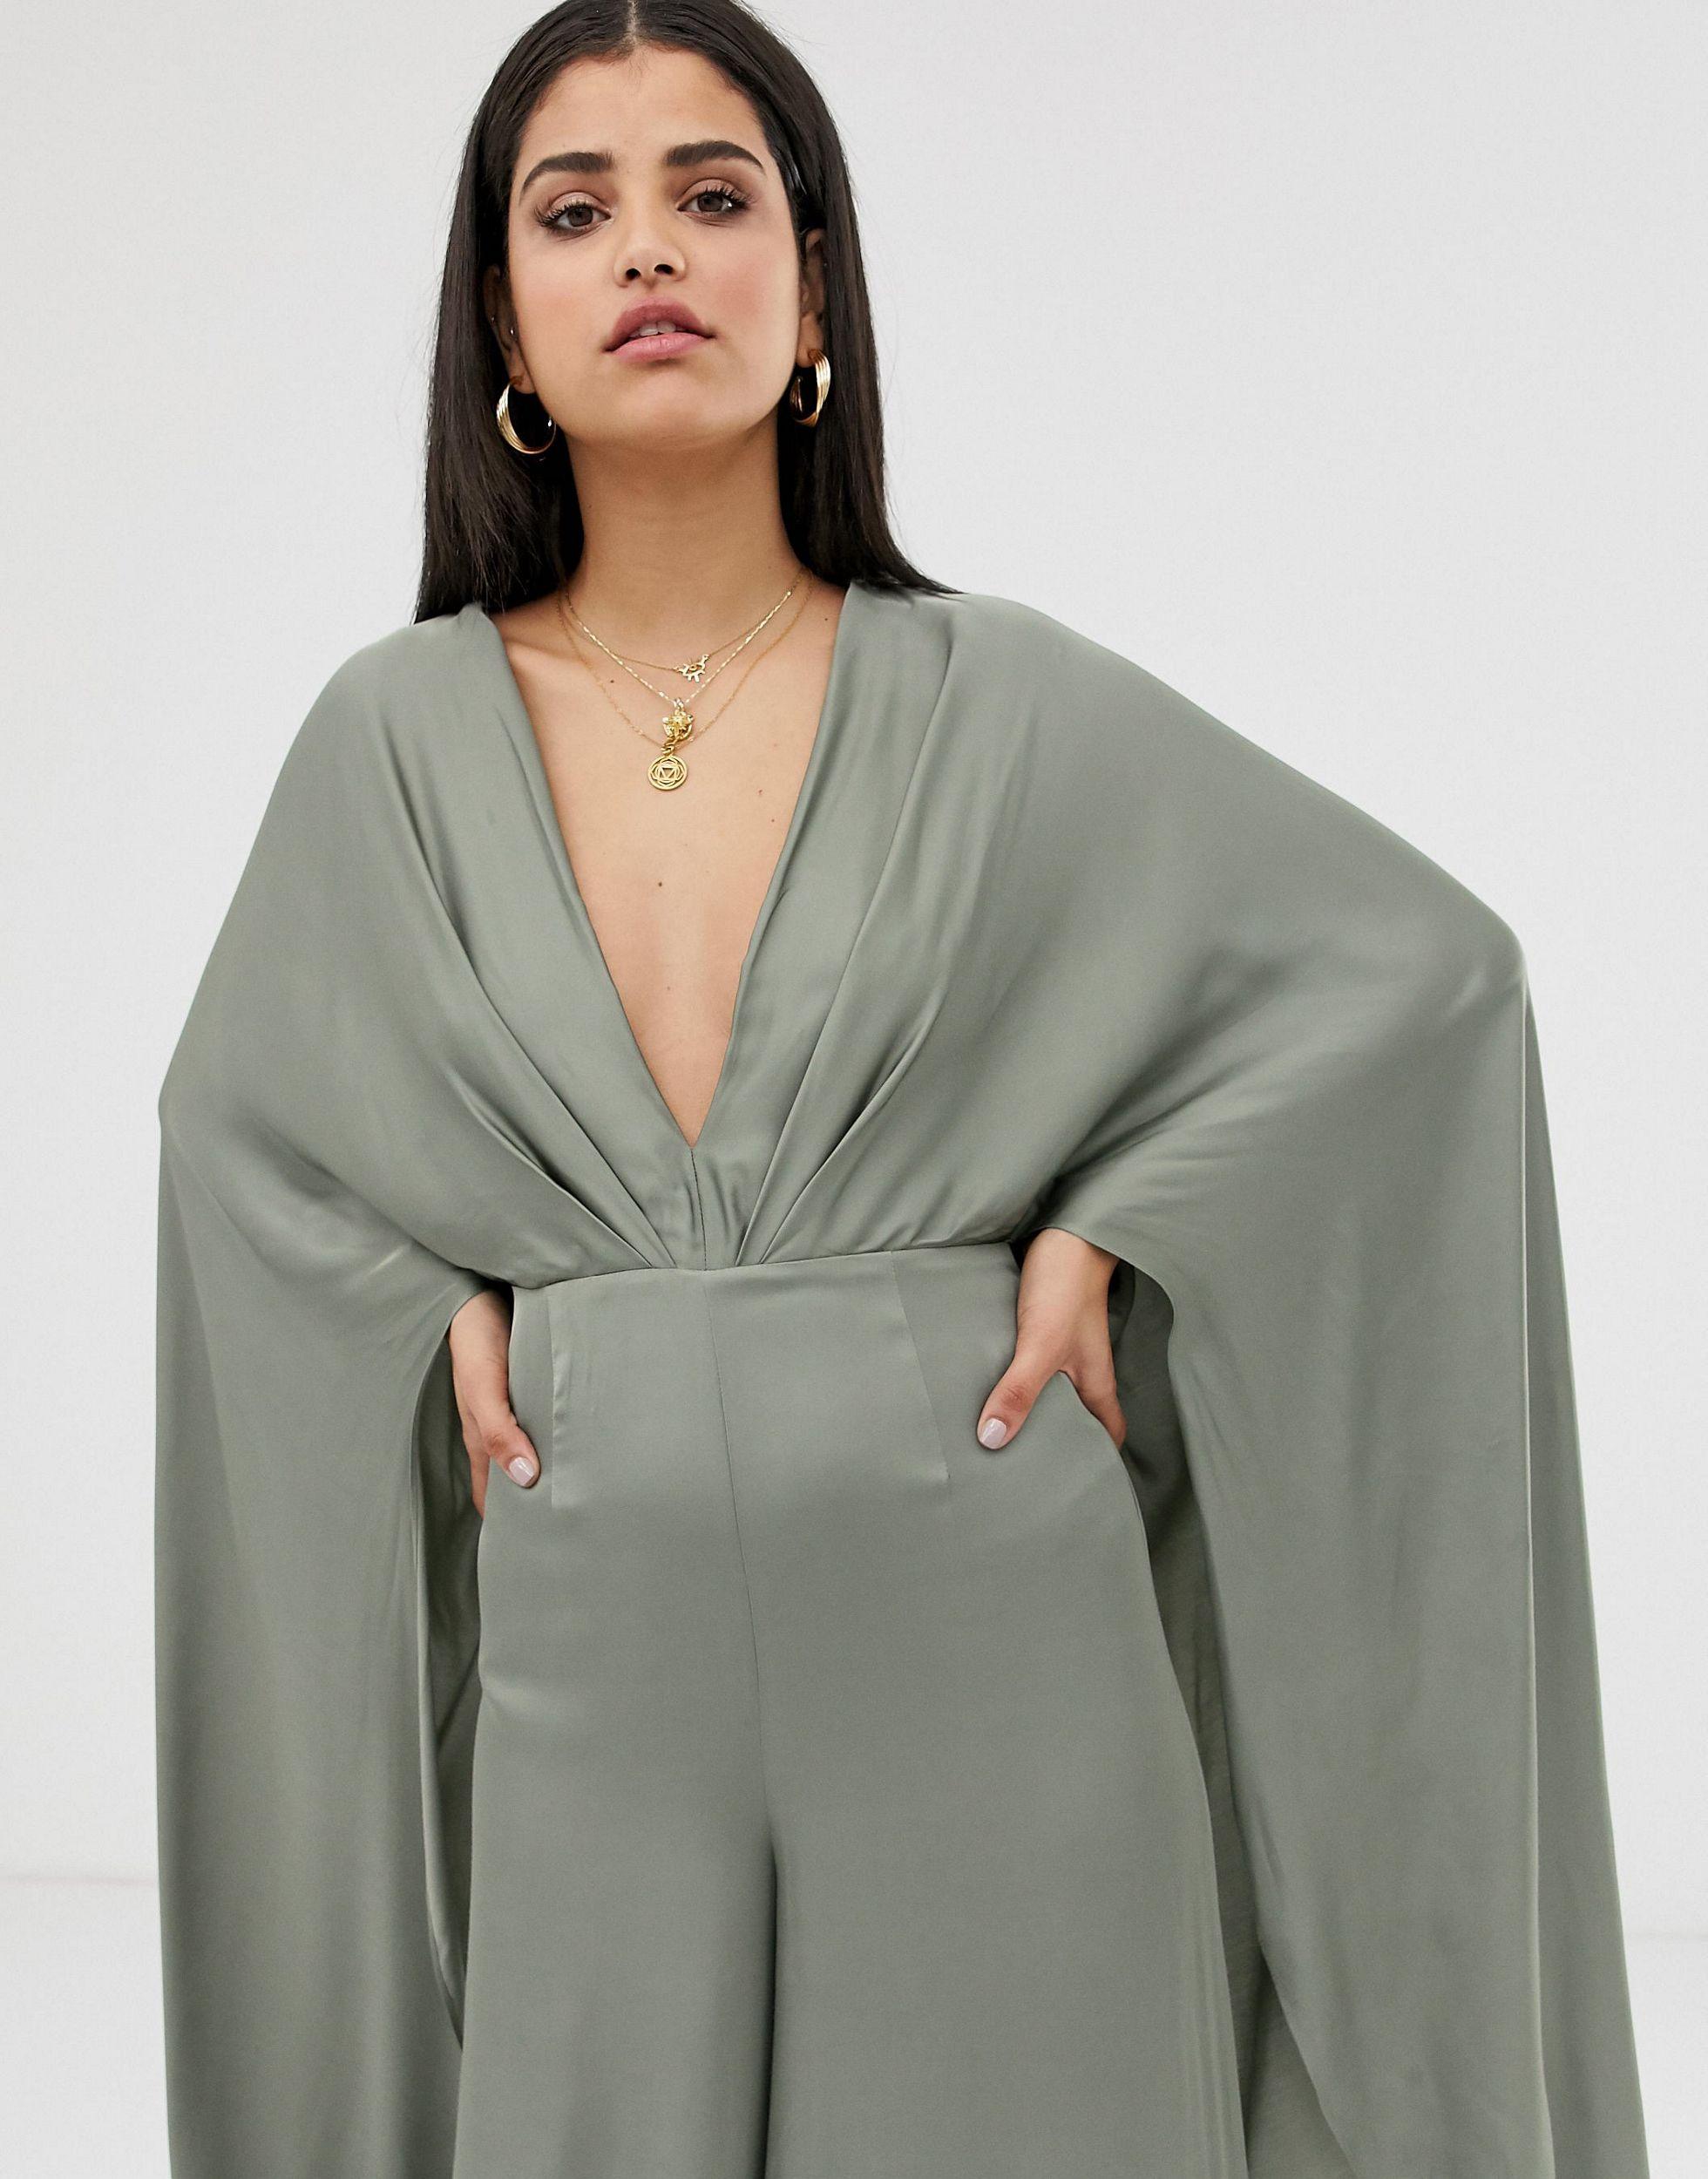 ASOS Tall Cape Sleeve Jumpsuit in Green | Lyst